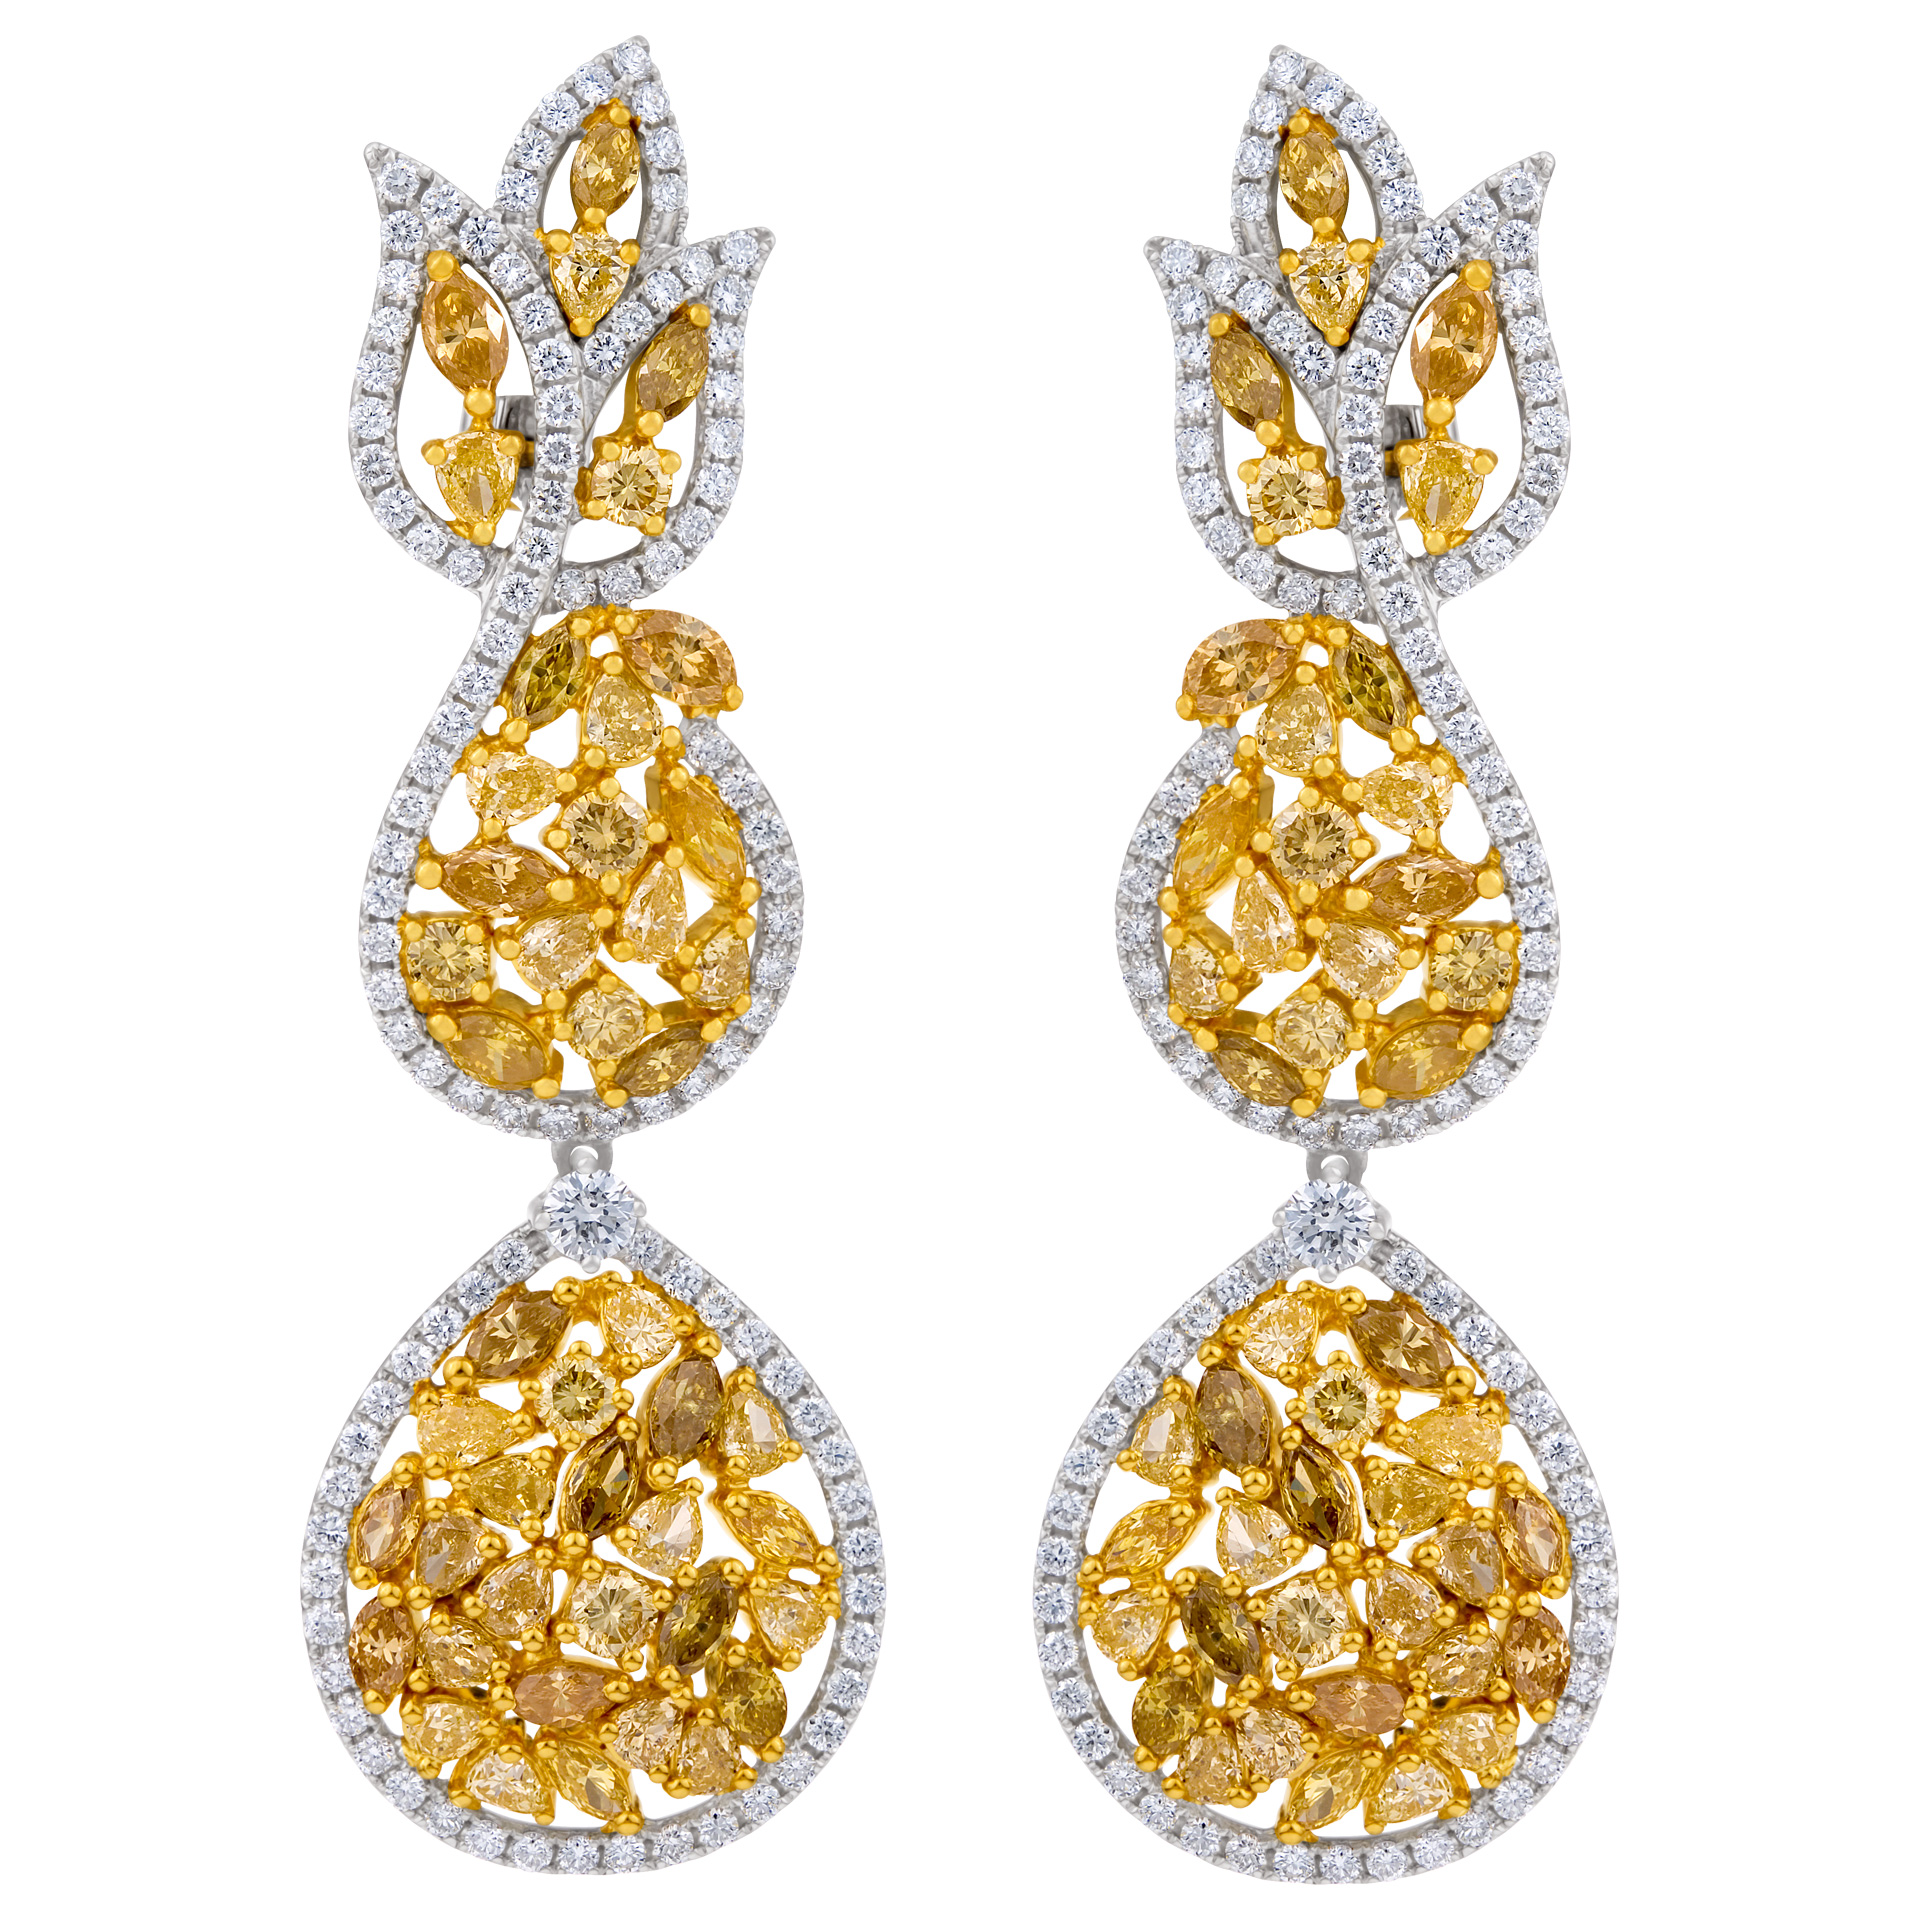 Drop diamond earrings in 18k yellow and white gold